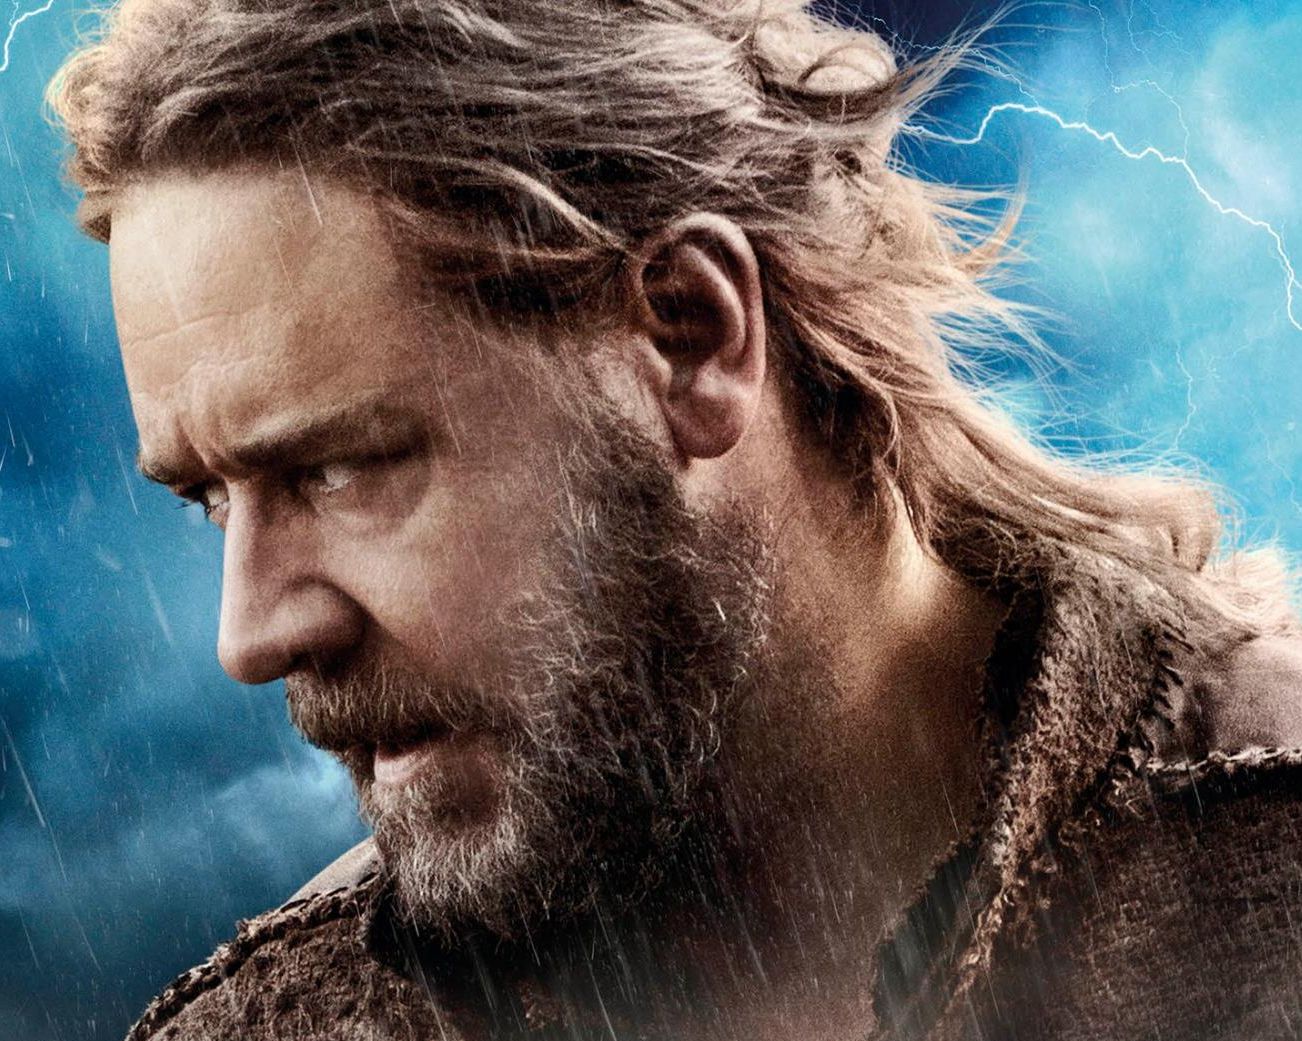 Russell Crowe, thunder, Noah